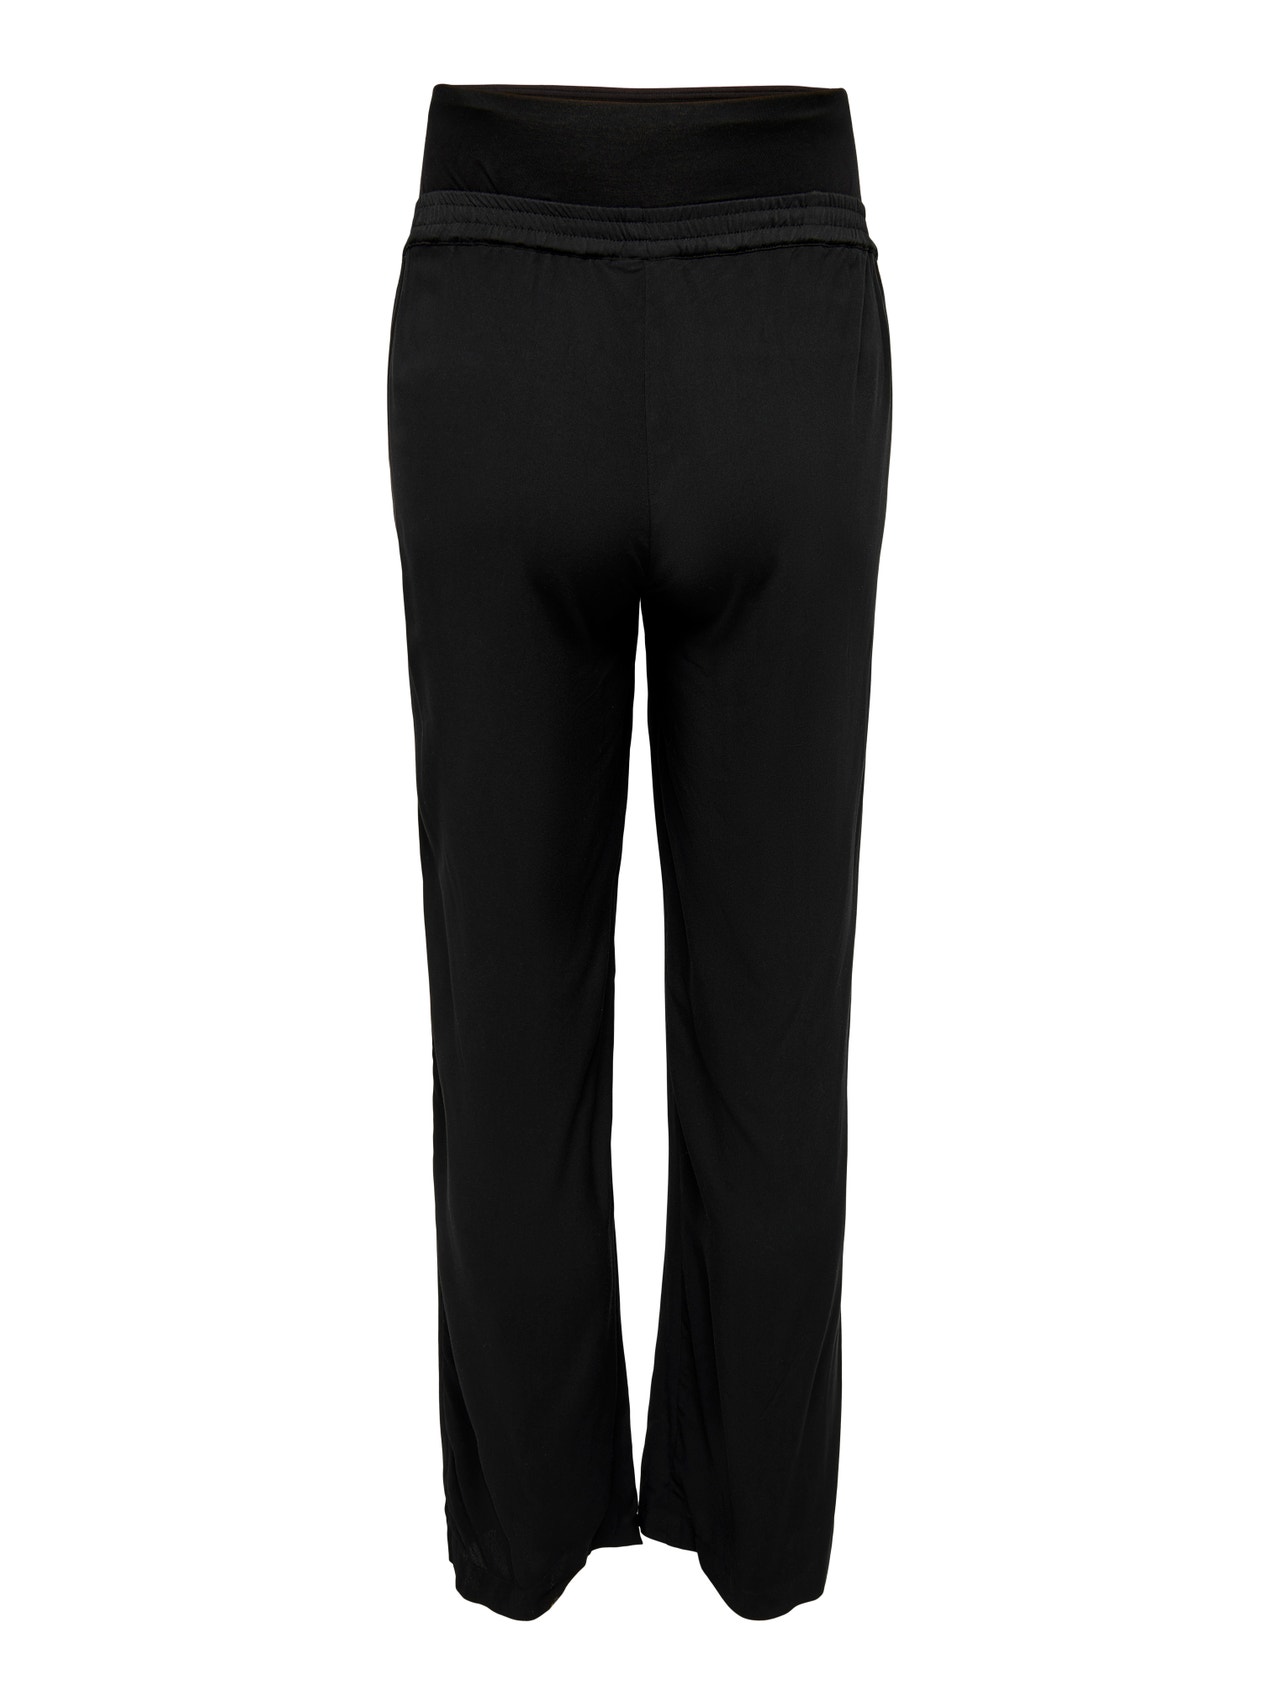 ONLY Normal geschnitten Hohe Taille Hose -Black - 15298890